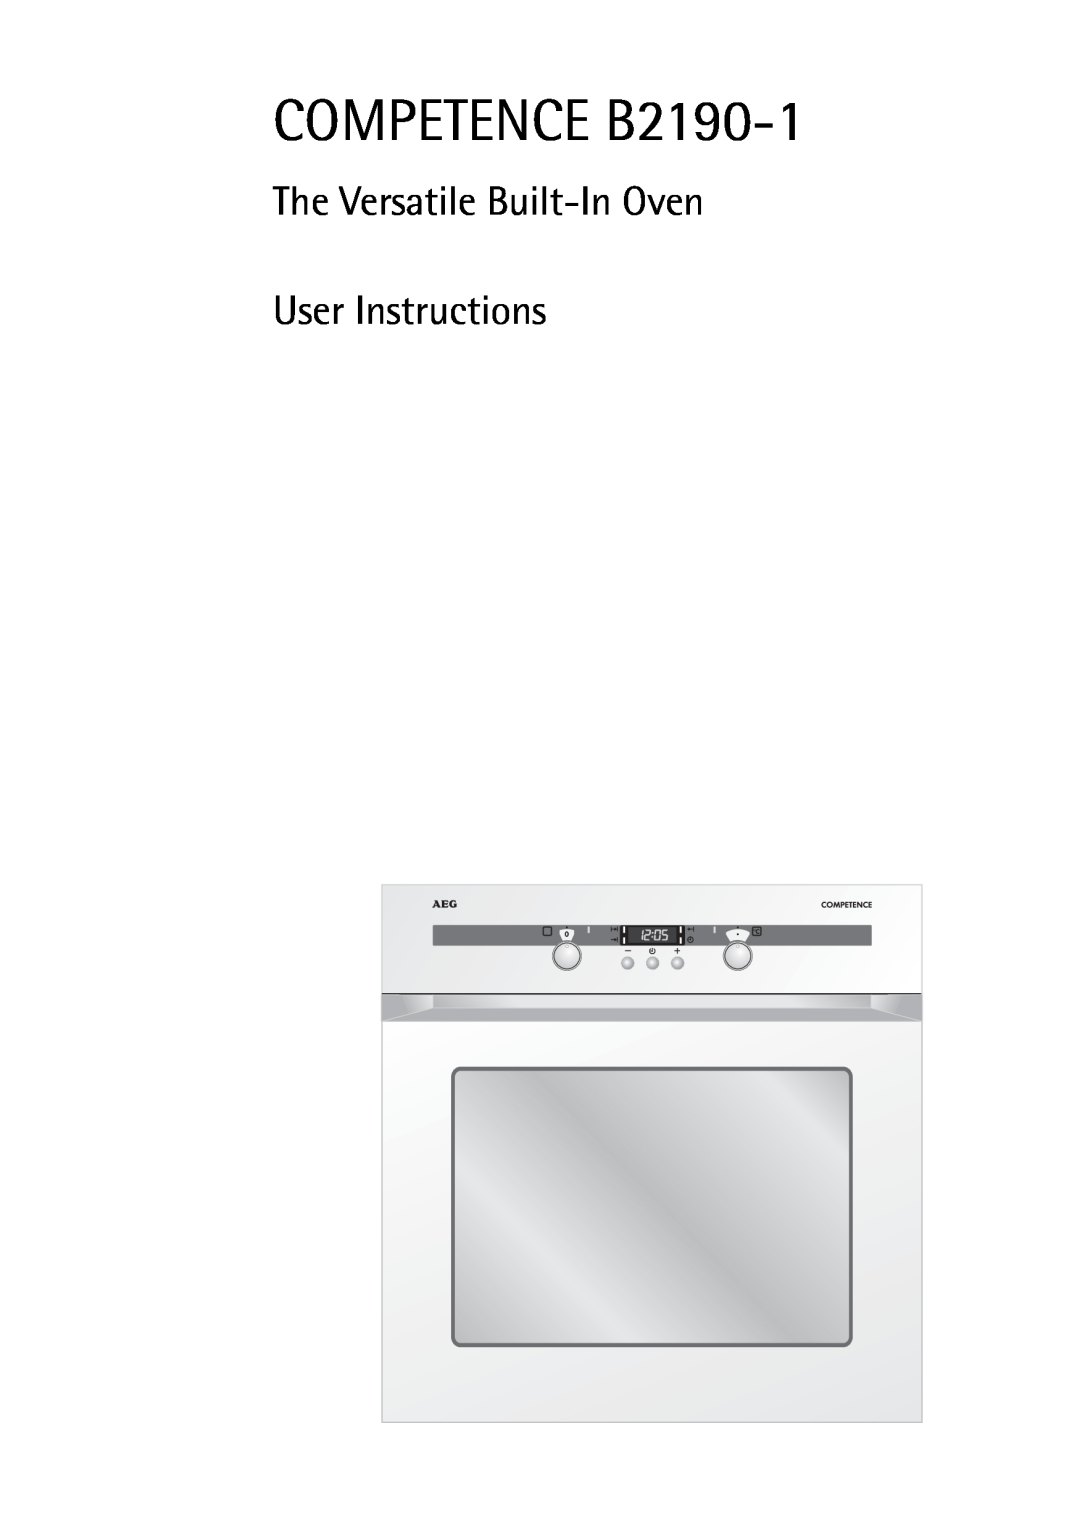 Electrolux manual COMPETENCE B2190-1, The Versatile Built-In Oven User Instructions 